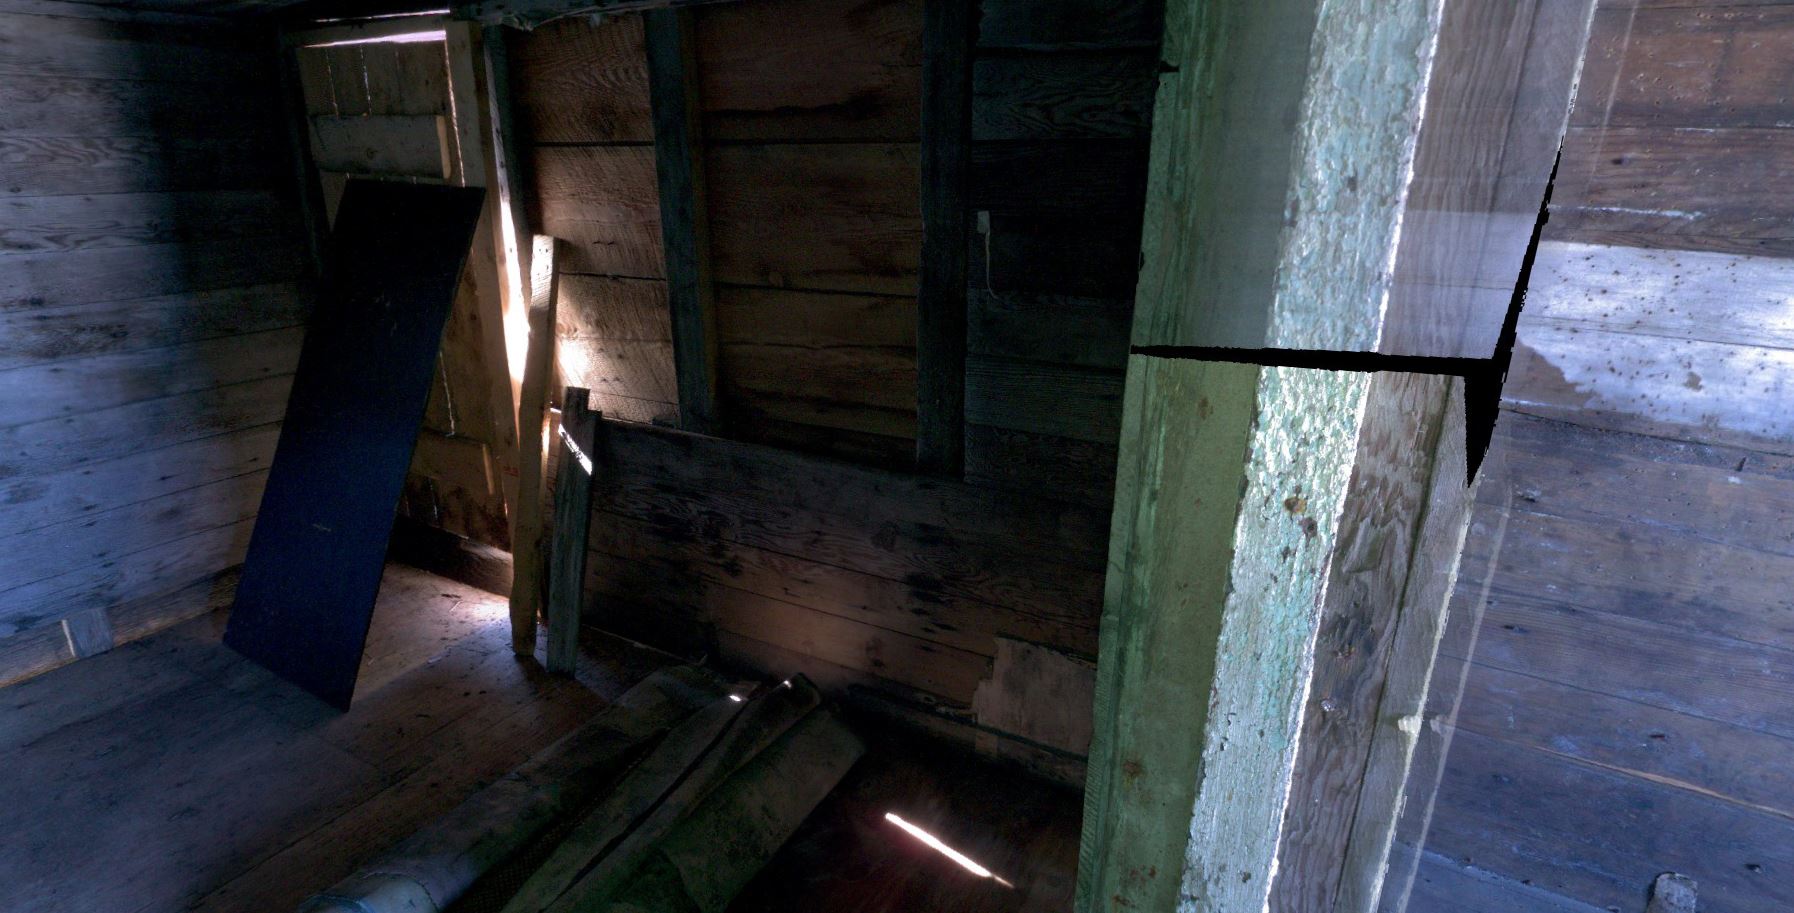 Panoramic view of scanning location 2 of the interior of Small House no.11 on Herschel Island